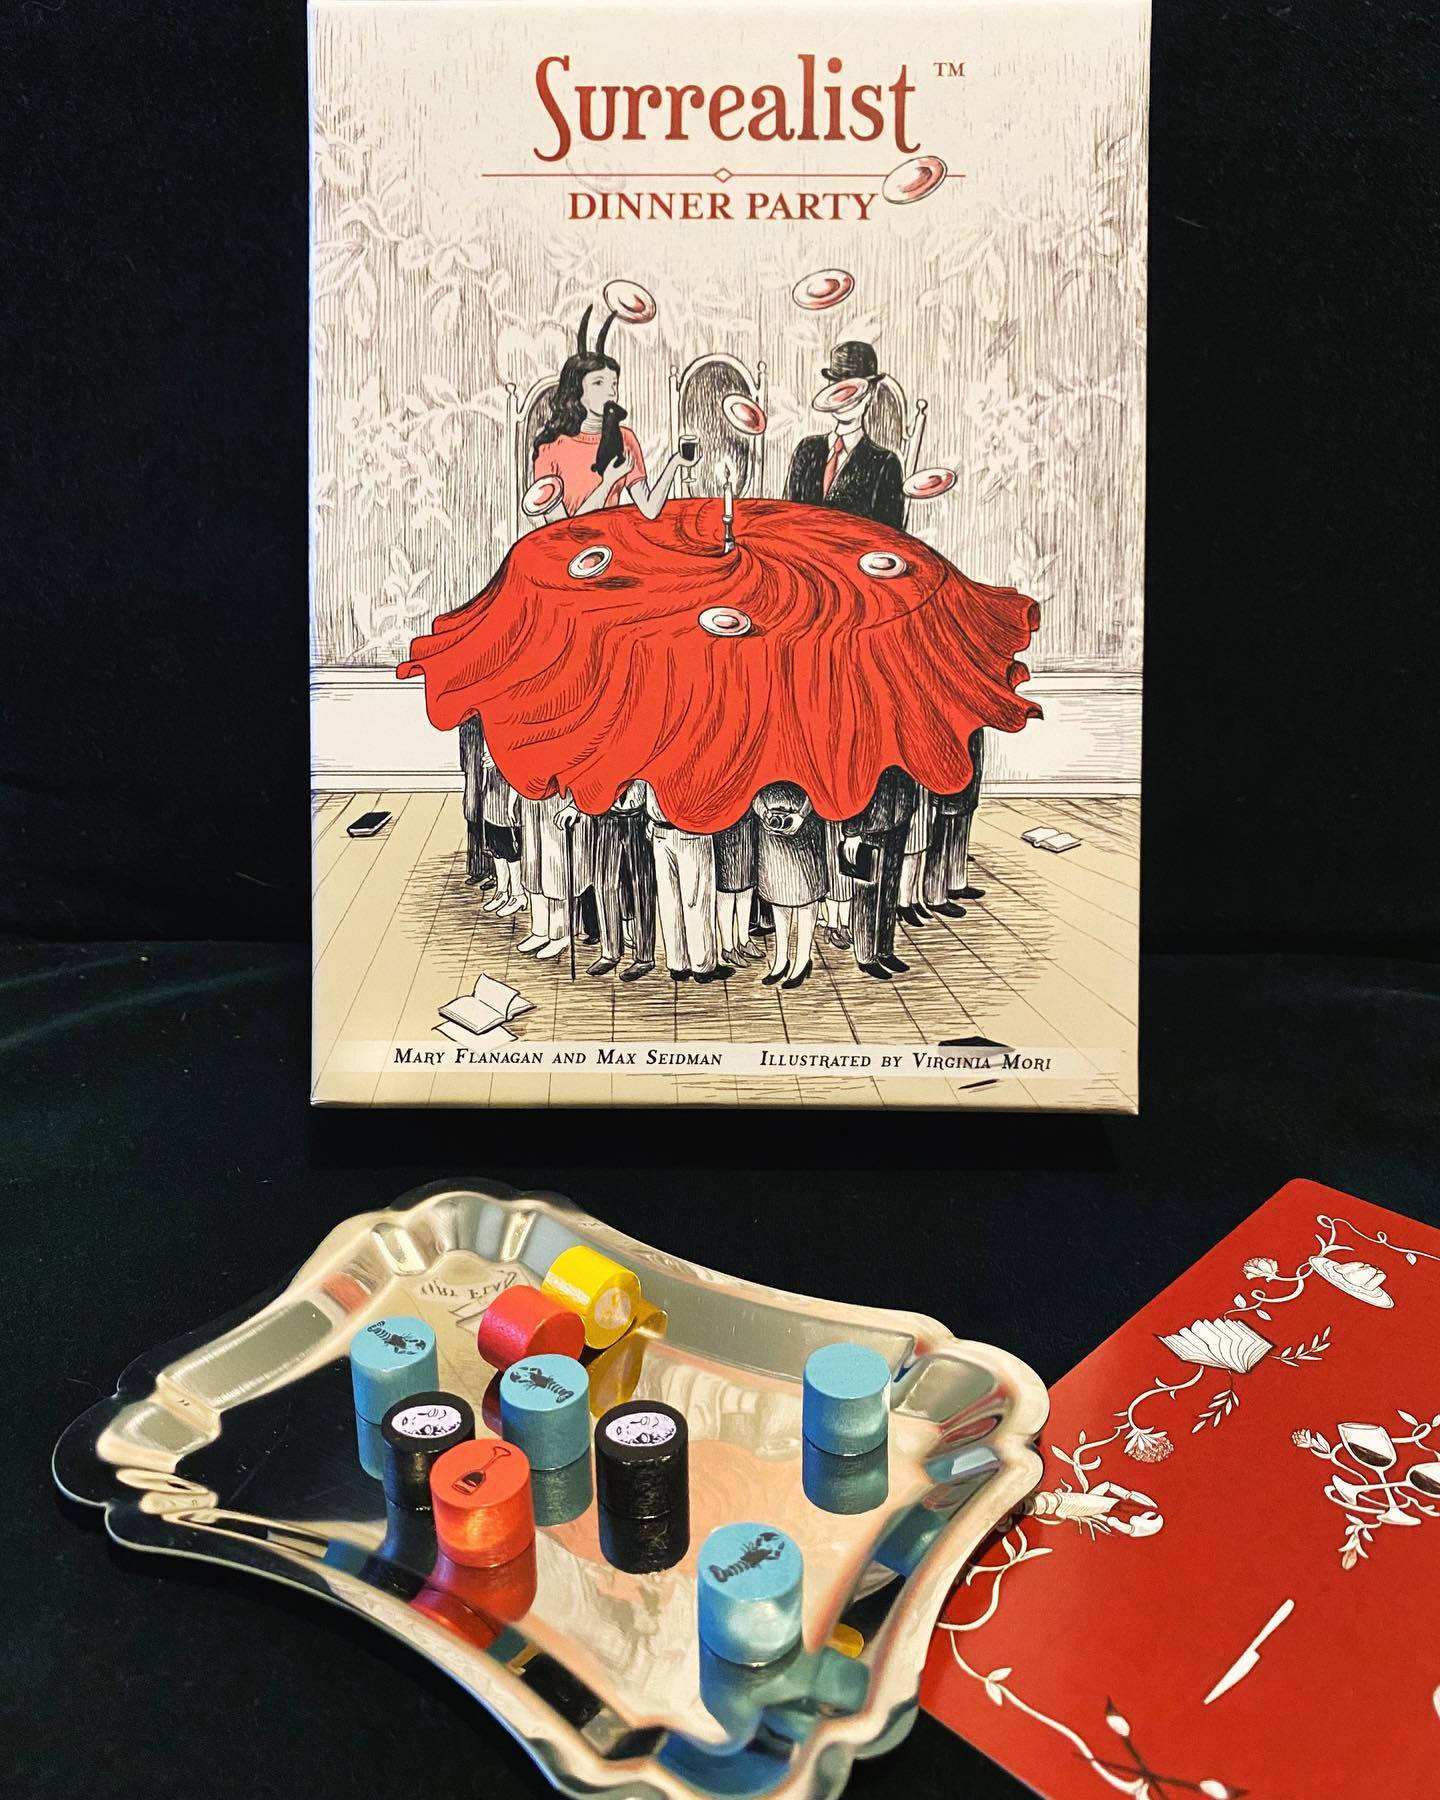 Surrealist Dinner Party was nominated for for this year’s @indiecade Tabletop Game Award! We’re so excited to be a part of this festival 🥳

#boardgames #boardgamesofinstagram #bgg #tabletopgames #indieboardgames #familygamenight #surrealism #surrealart #resonym #cardgames #indiecade #gameawards